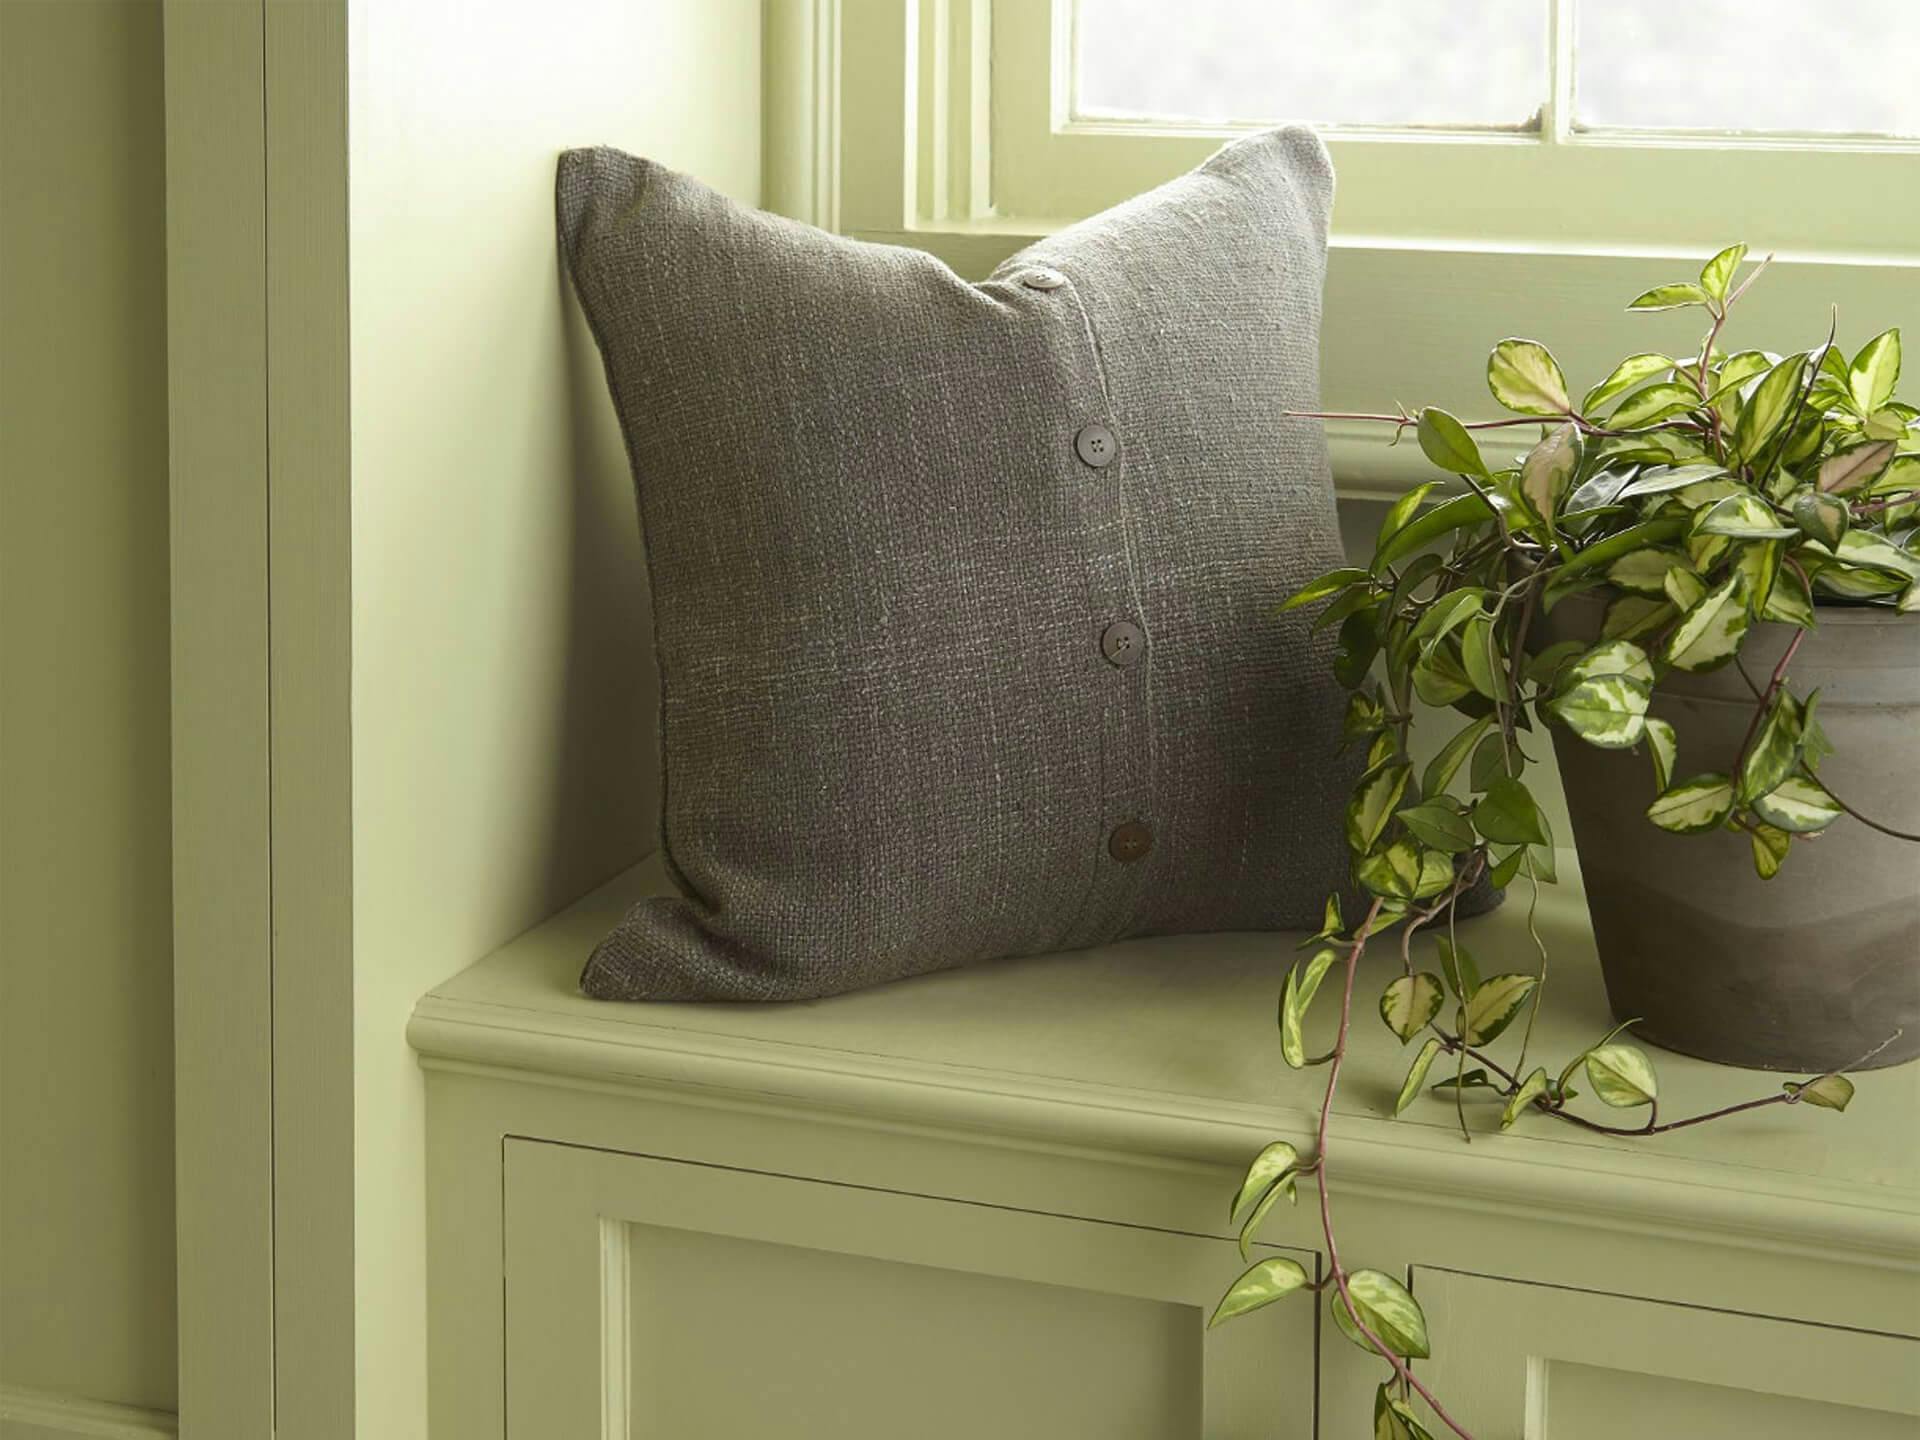 Bay window bench seat with pillow and potted plant.